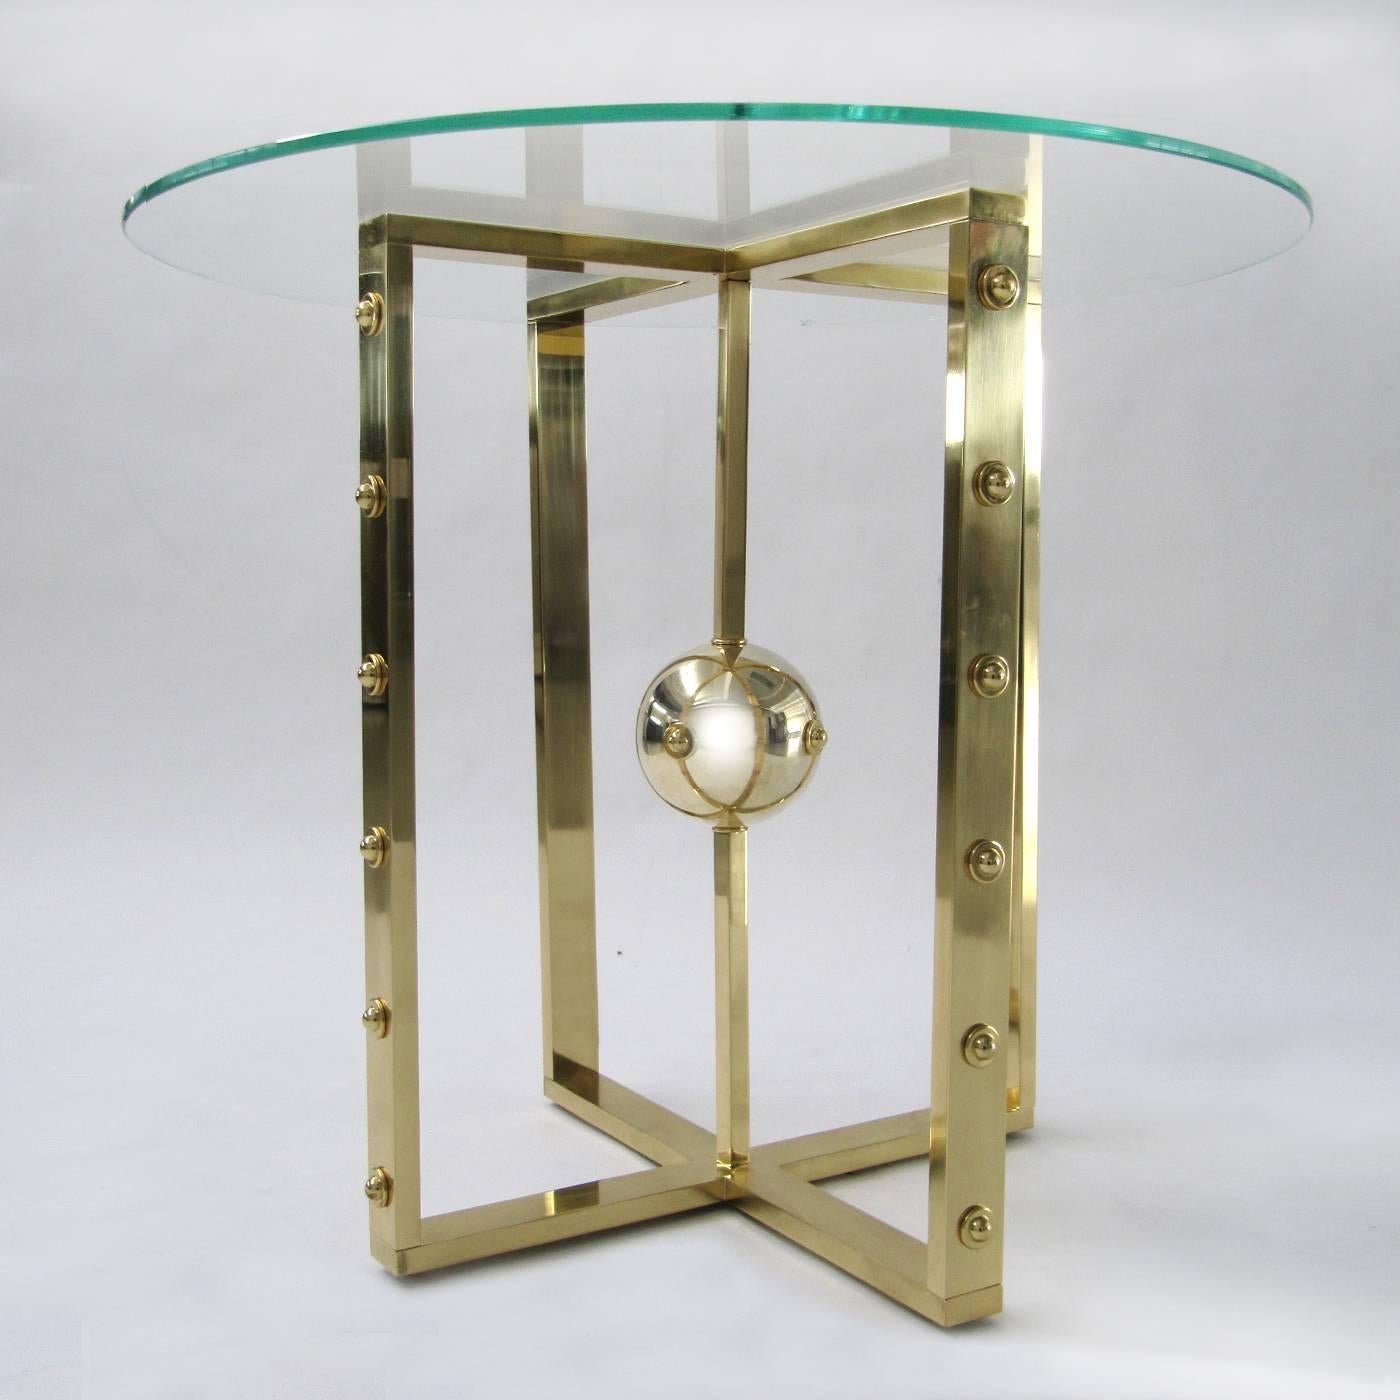 This elegant table is inspired by the structure of the atom and features a brass structure that has been brushed by hand and finished with a protective transparent treatment. The top is in hardened glass.